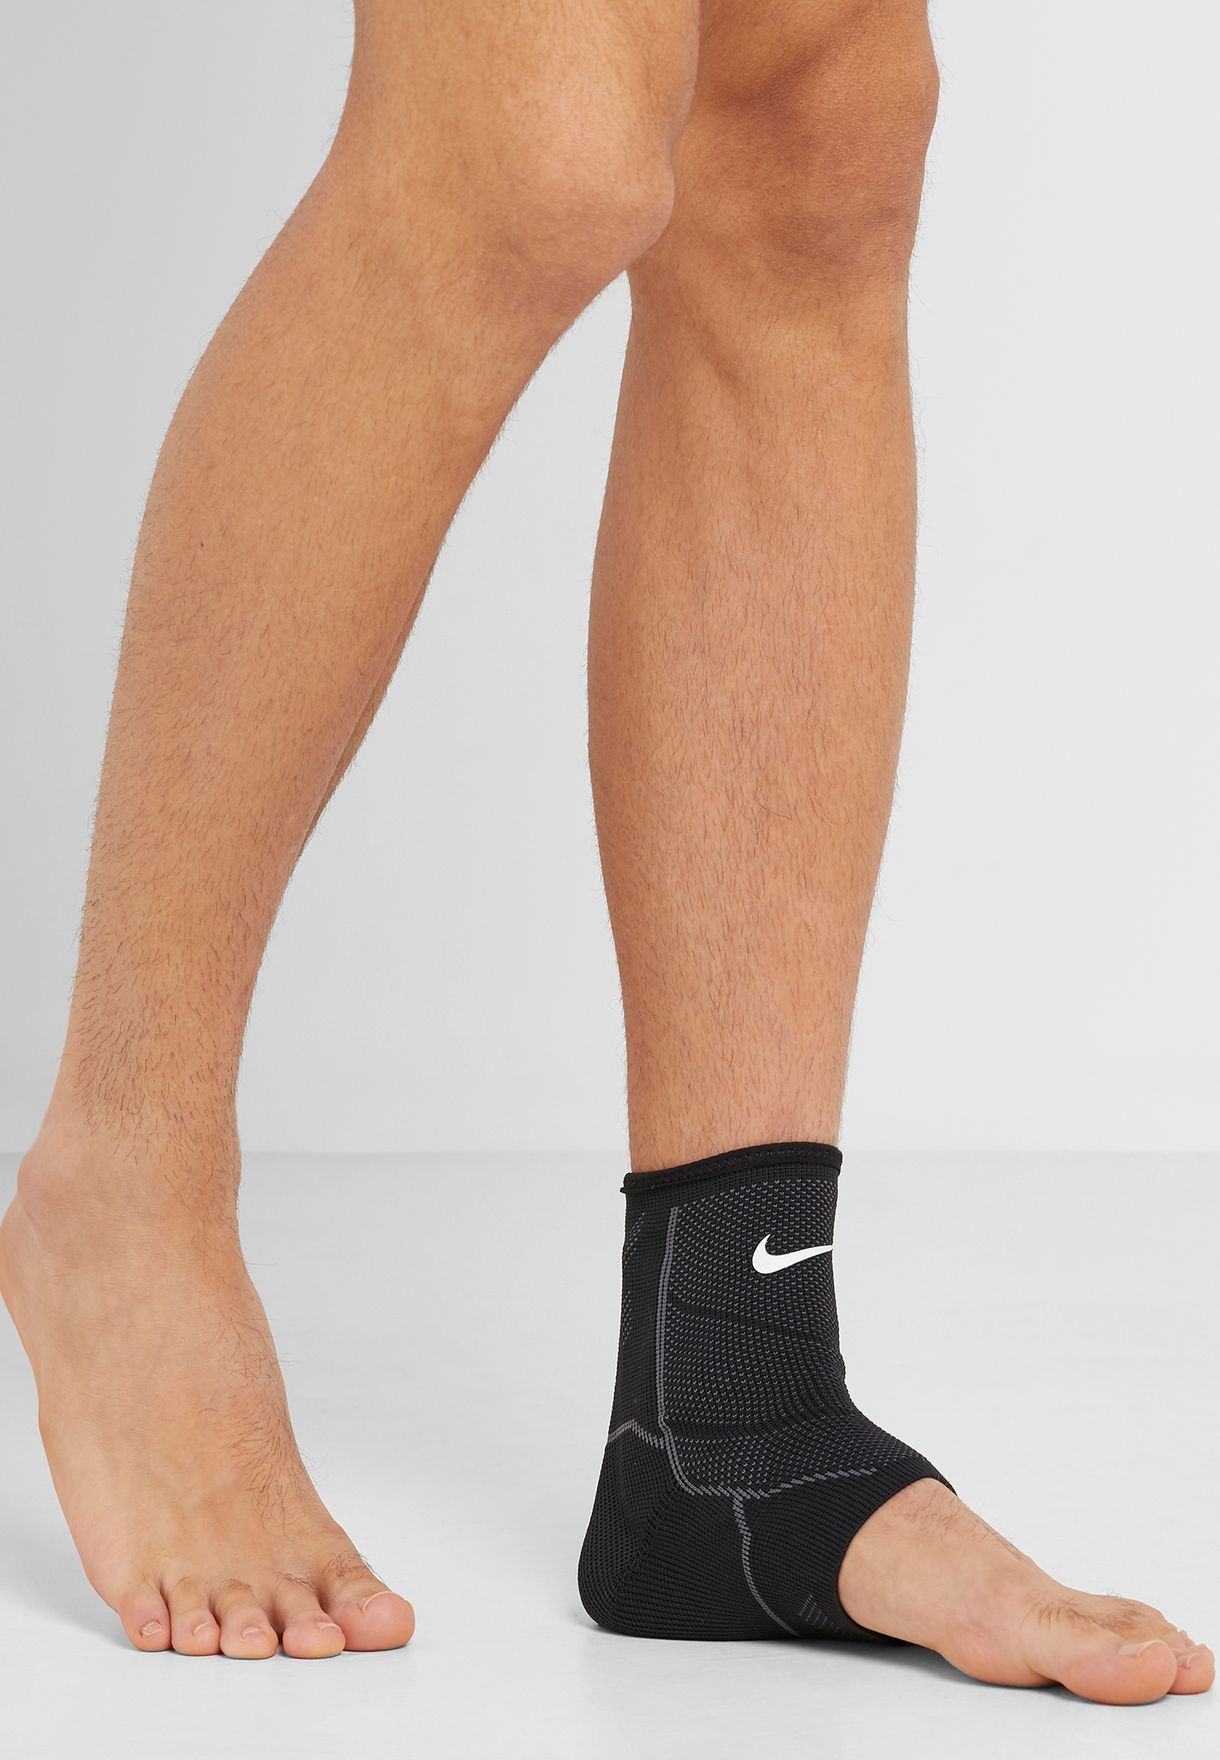 nike advantage knitted ankle sleeve